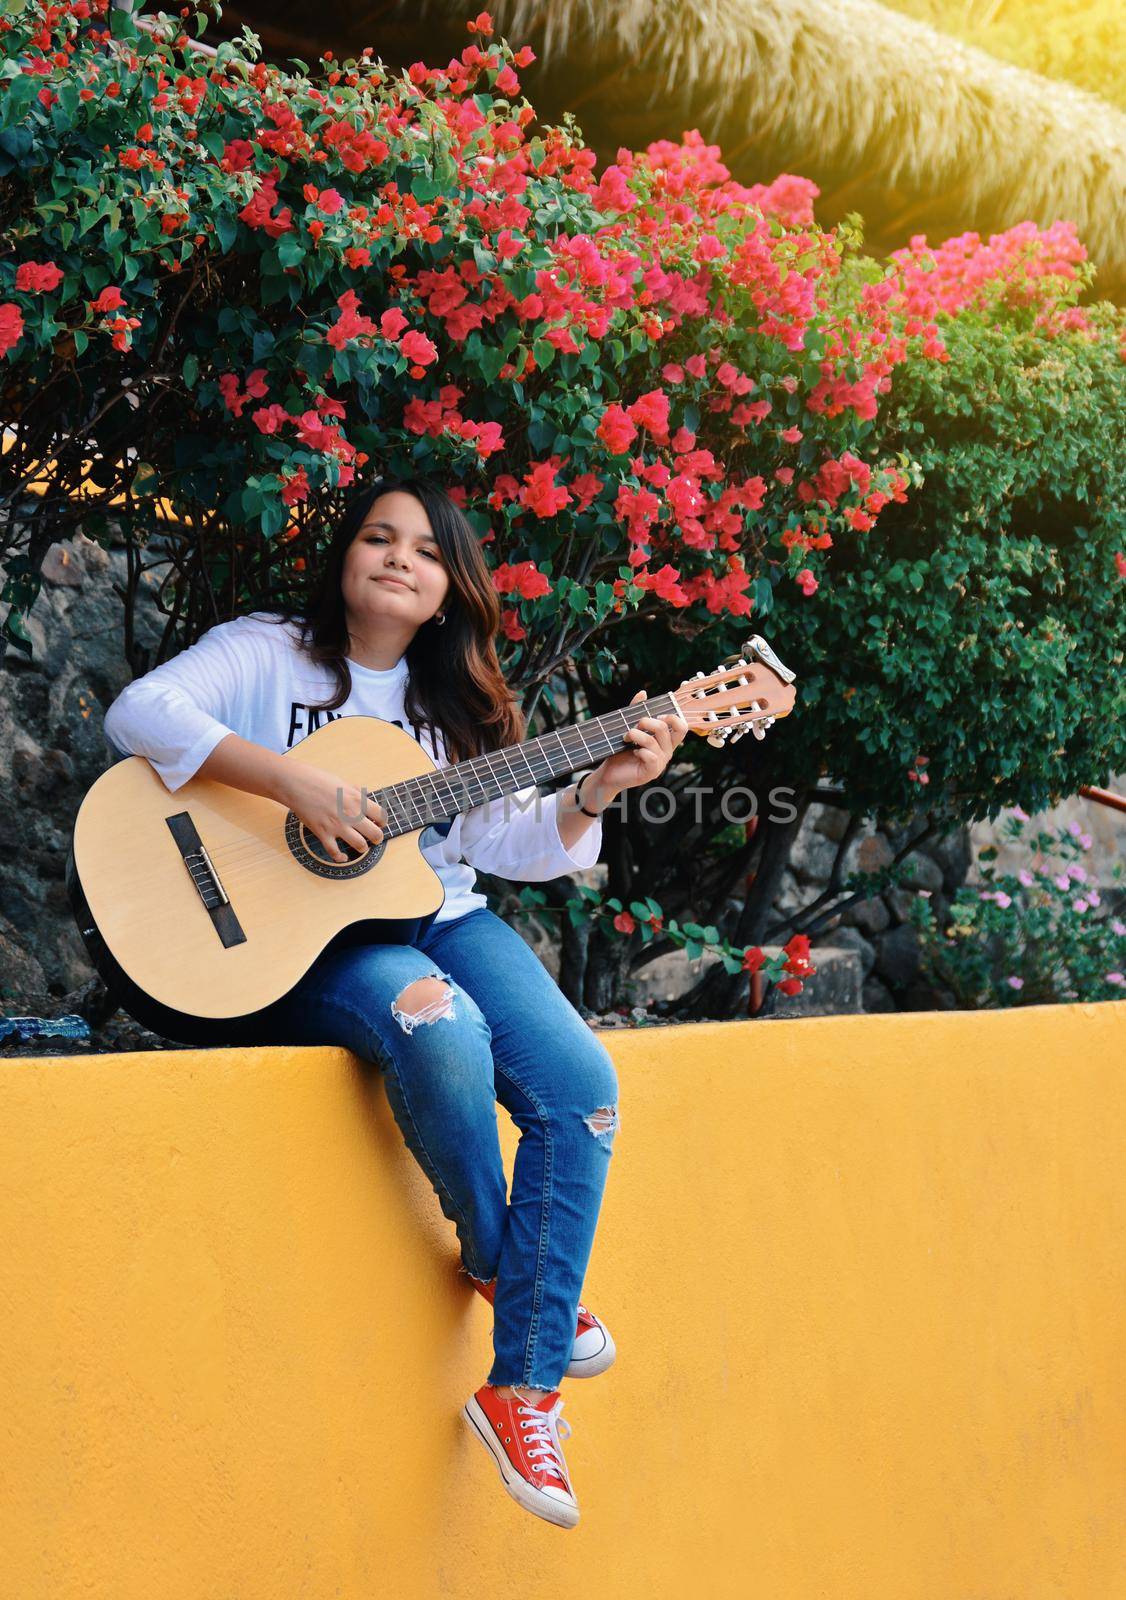 A girl sitting playing guitar outdoors, Portrait of a smiling girl playing guitar, Lifestyle of a girl playing guitar outdoors